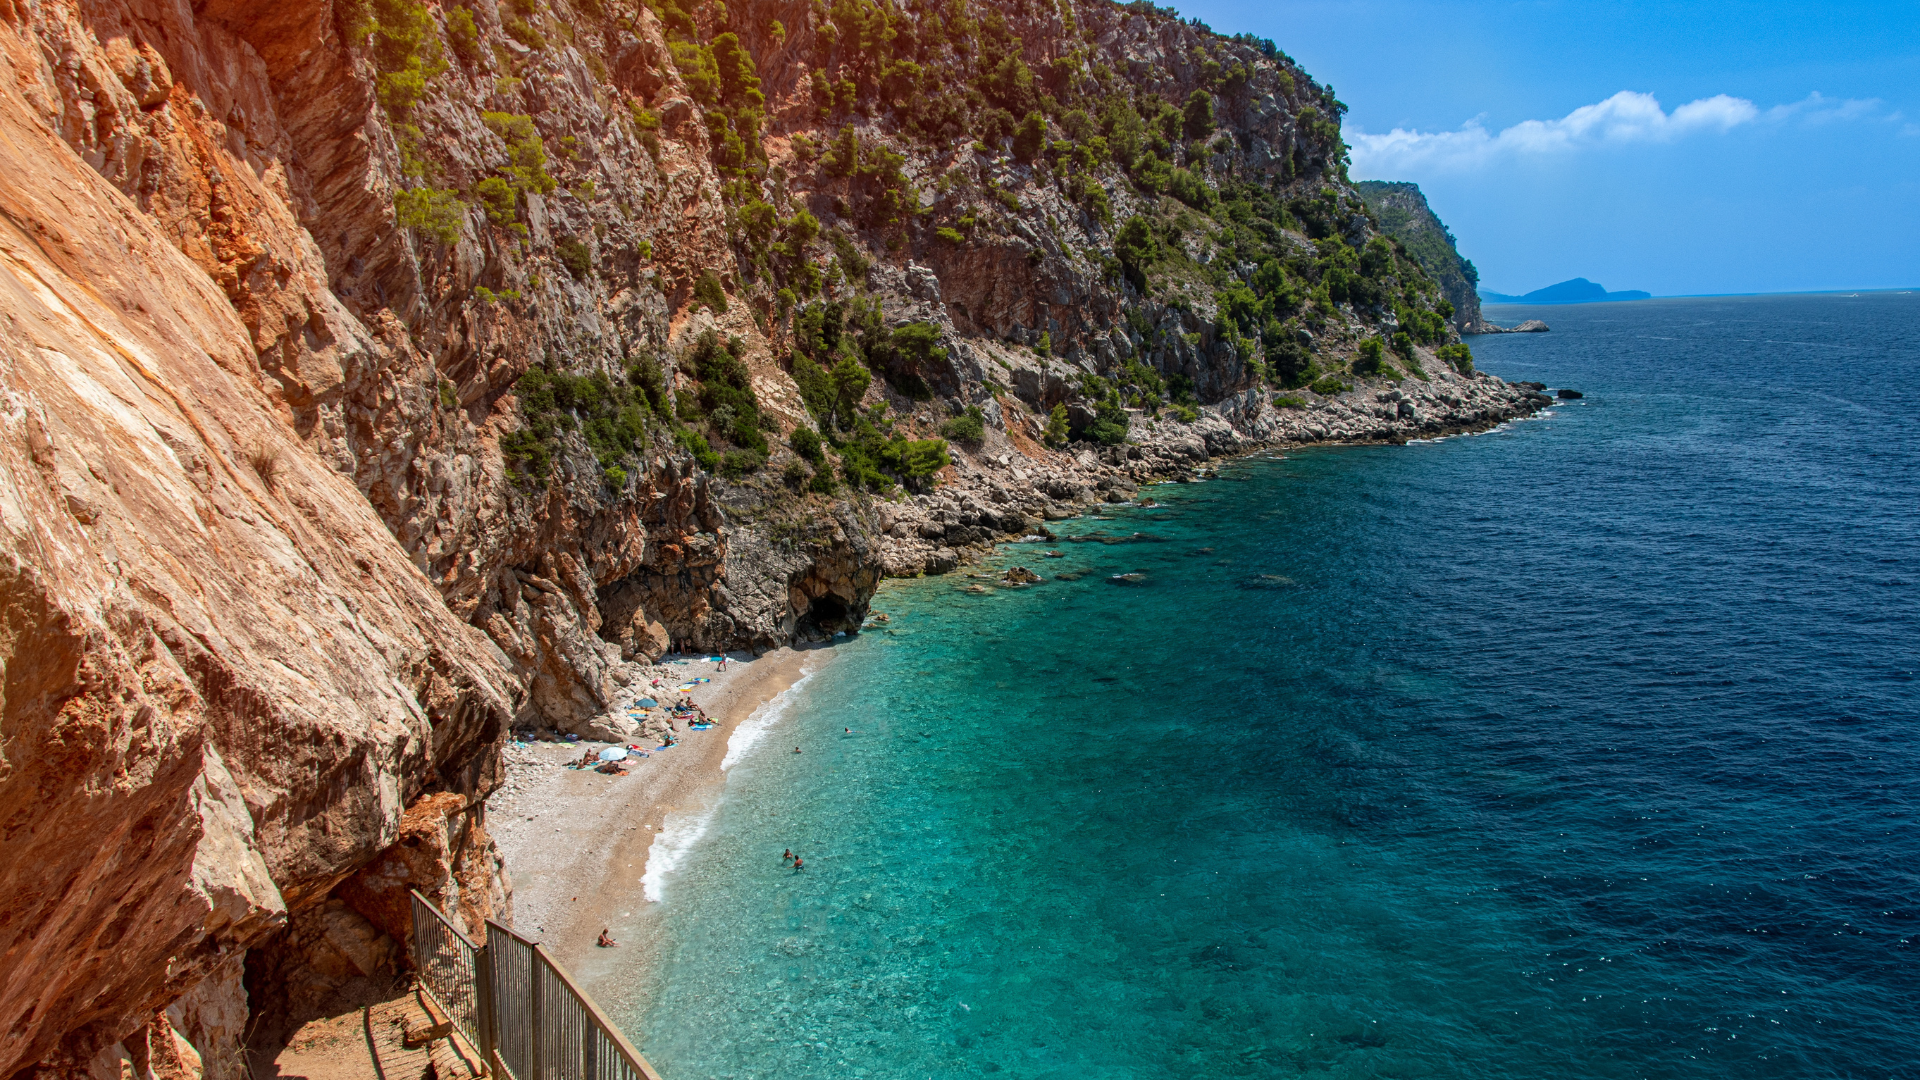 Secluded bay where celebrities in Croatia are frequently seen